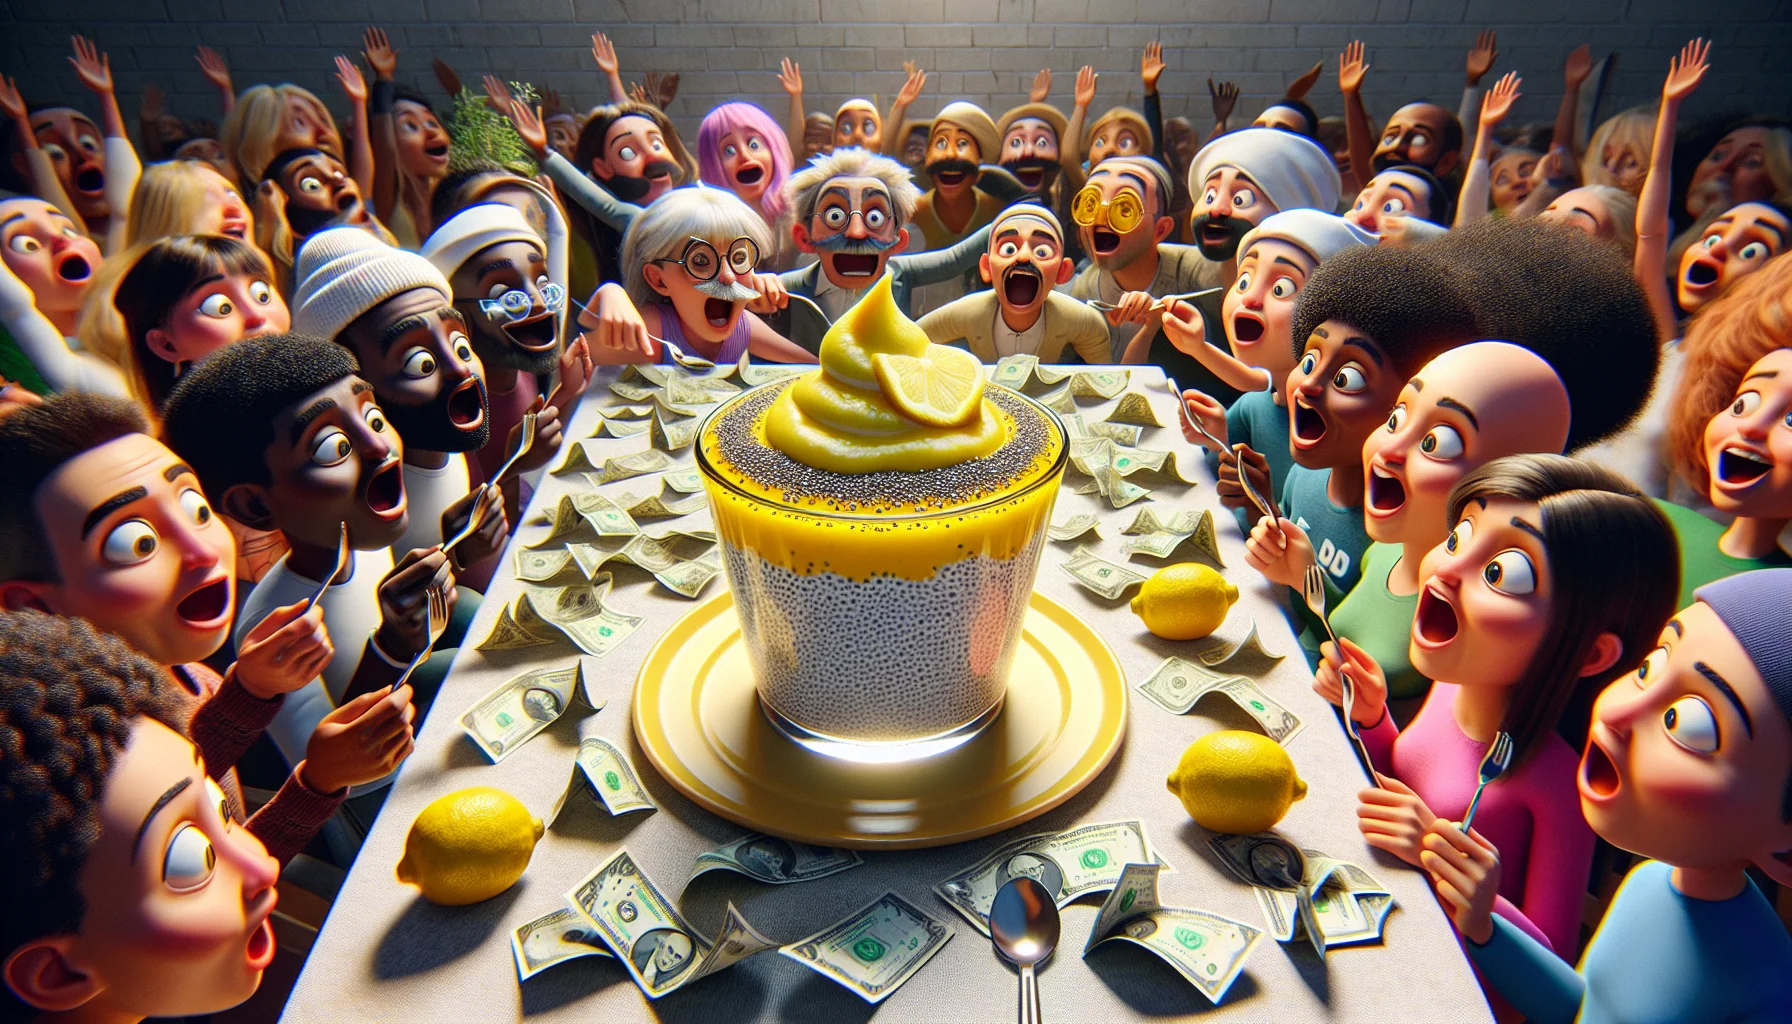 Imagine a hilarious scene that illustrates the affordability of healthy eating. At the center, visualize a vibrant lemon chia pudding, glowing with golden hues from fresh lemons and speckled with tiny chia seeds. It sits atop a table made of crumpled dollar bills, to emphasize its cost effectiveness. A multiethnic group of animated characters, with Black, Caucasian, South Asian, and Hispanic men and women, are gathered around. They have their eyes wide open in shock, mouths watering with anticipation, and are reaching out for spoons, ready to partake. Make the whole setting fantastical and charming, to inspire a welcoming perspective towards healthy food.